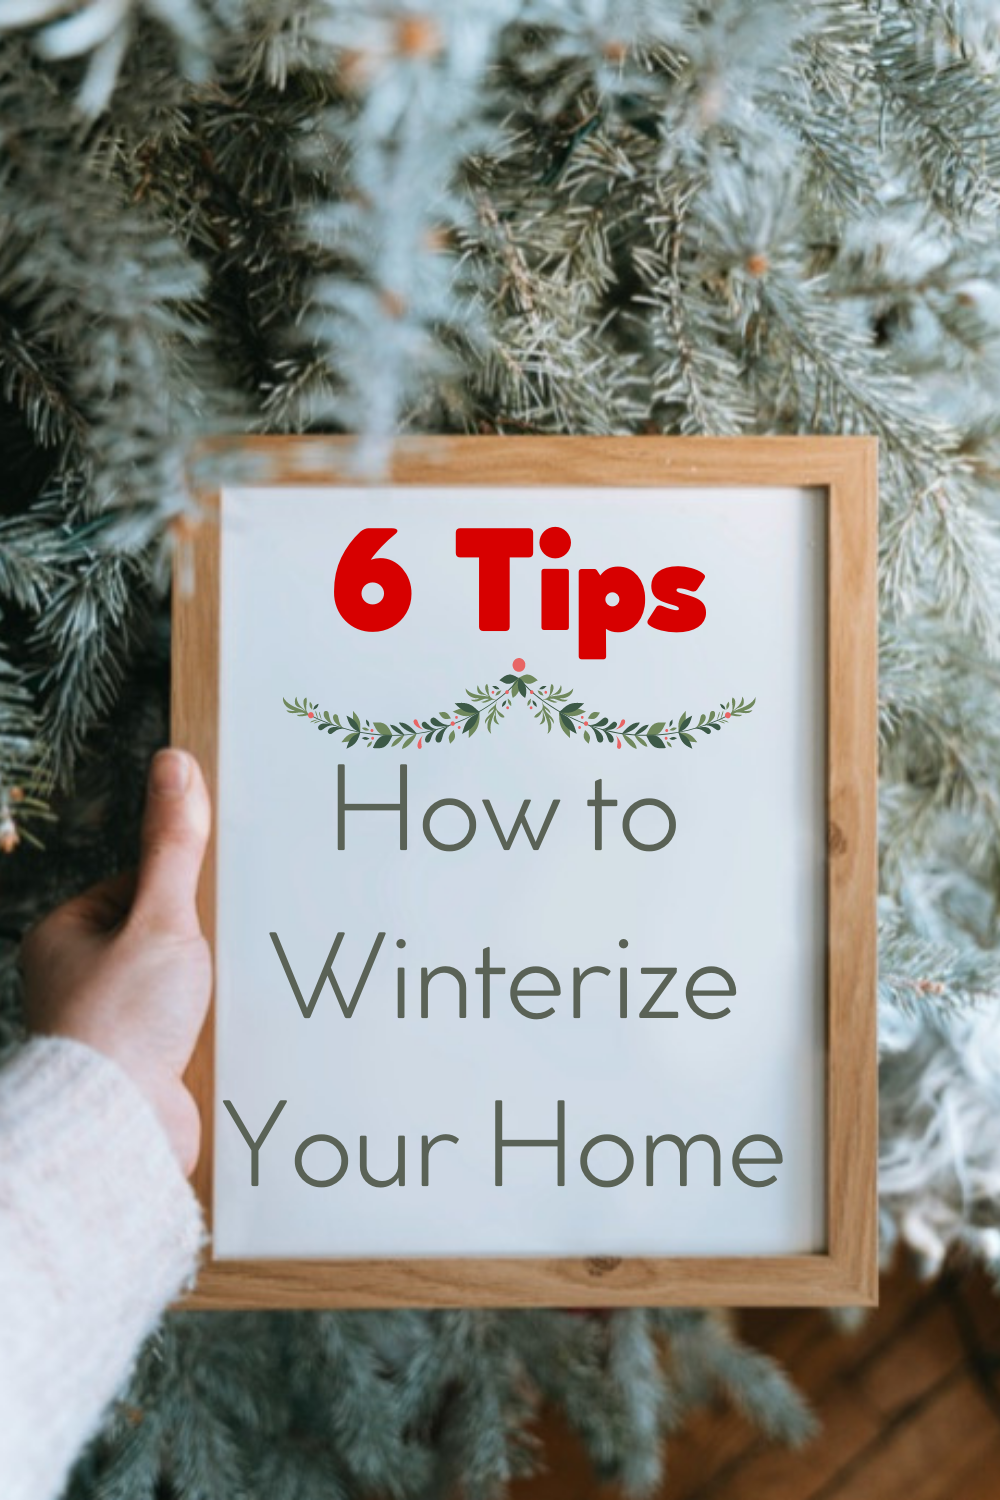 6 tips How to Winterize your home